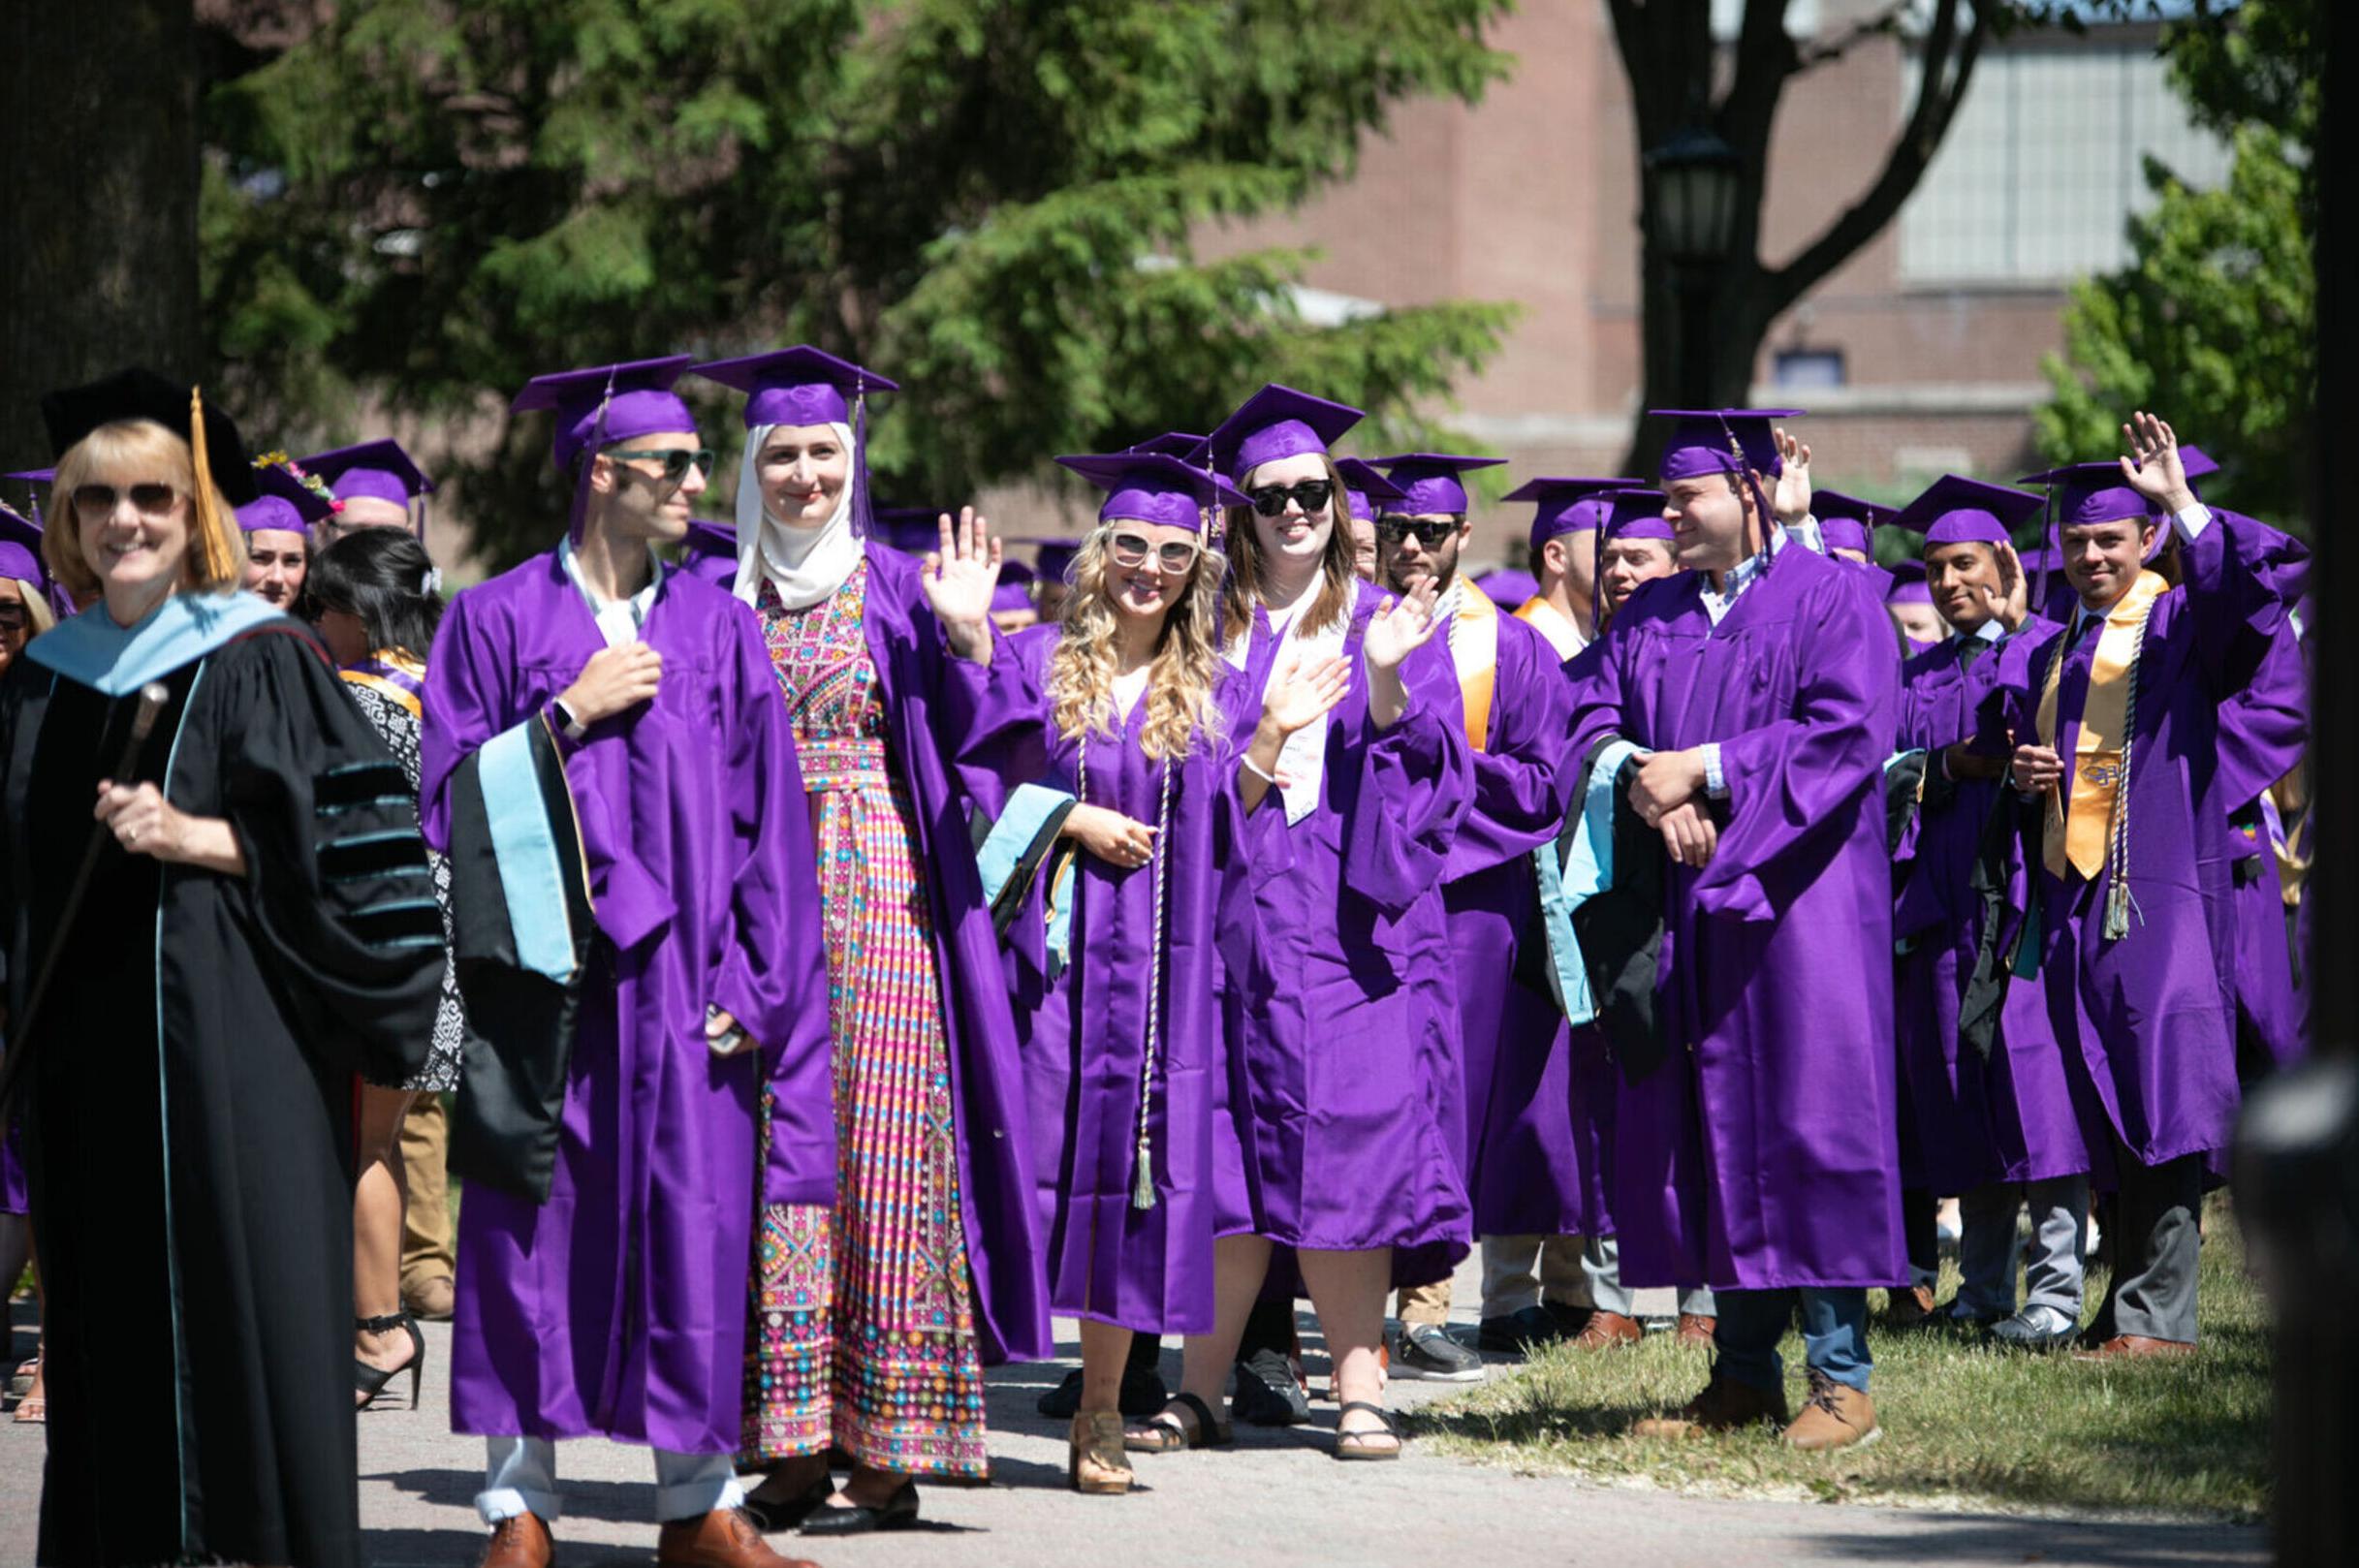 A group of Class of 2023 graduates wave at the camera during Commencement